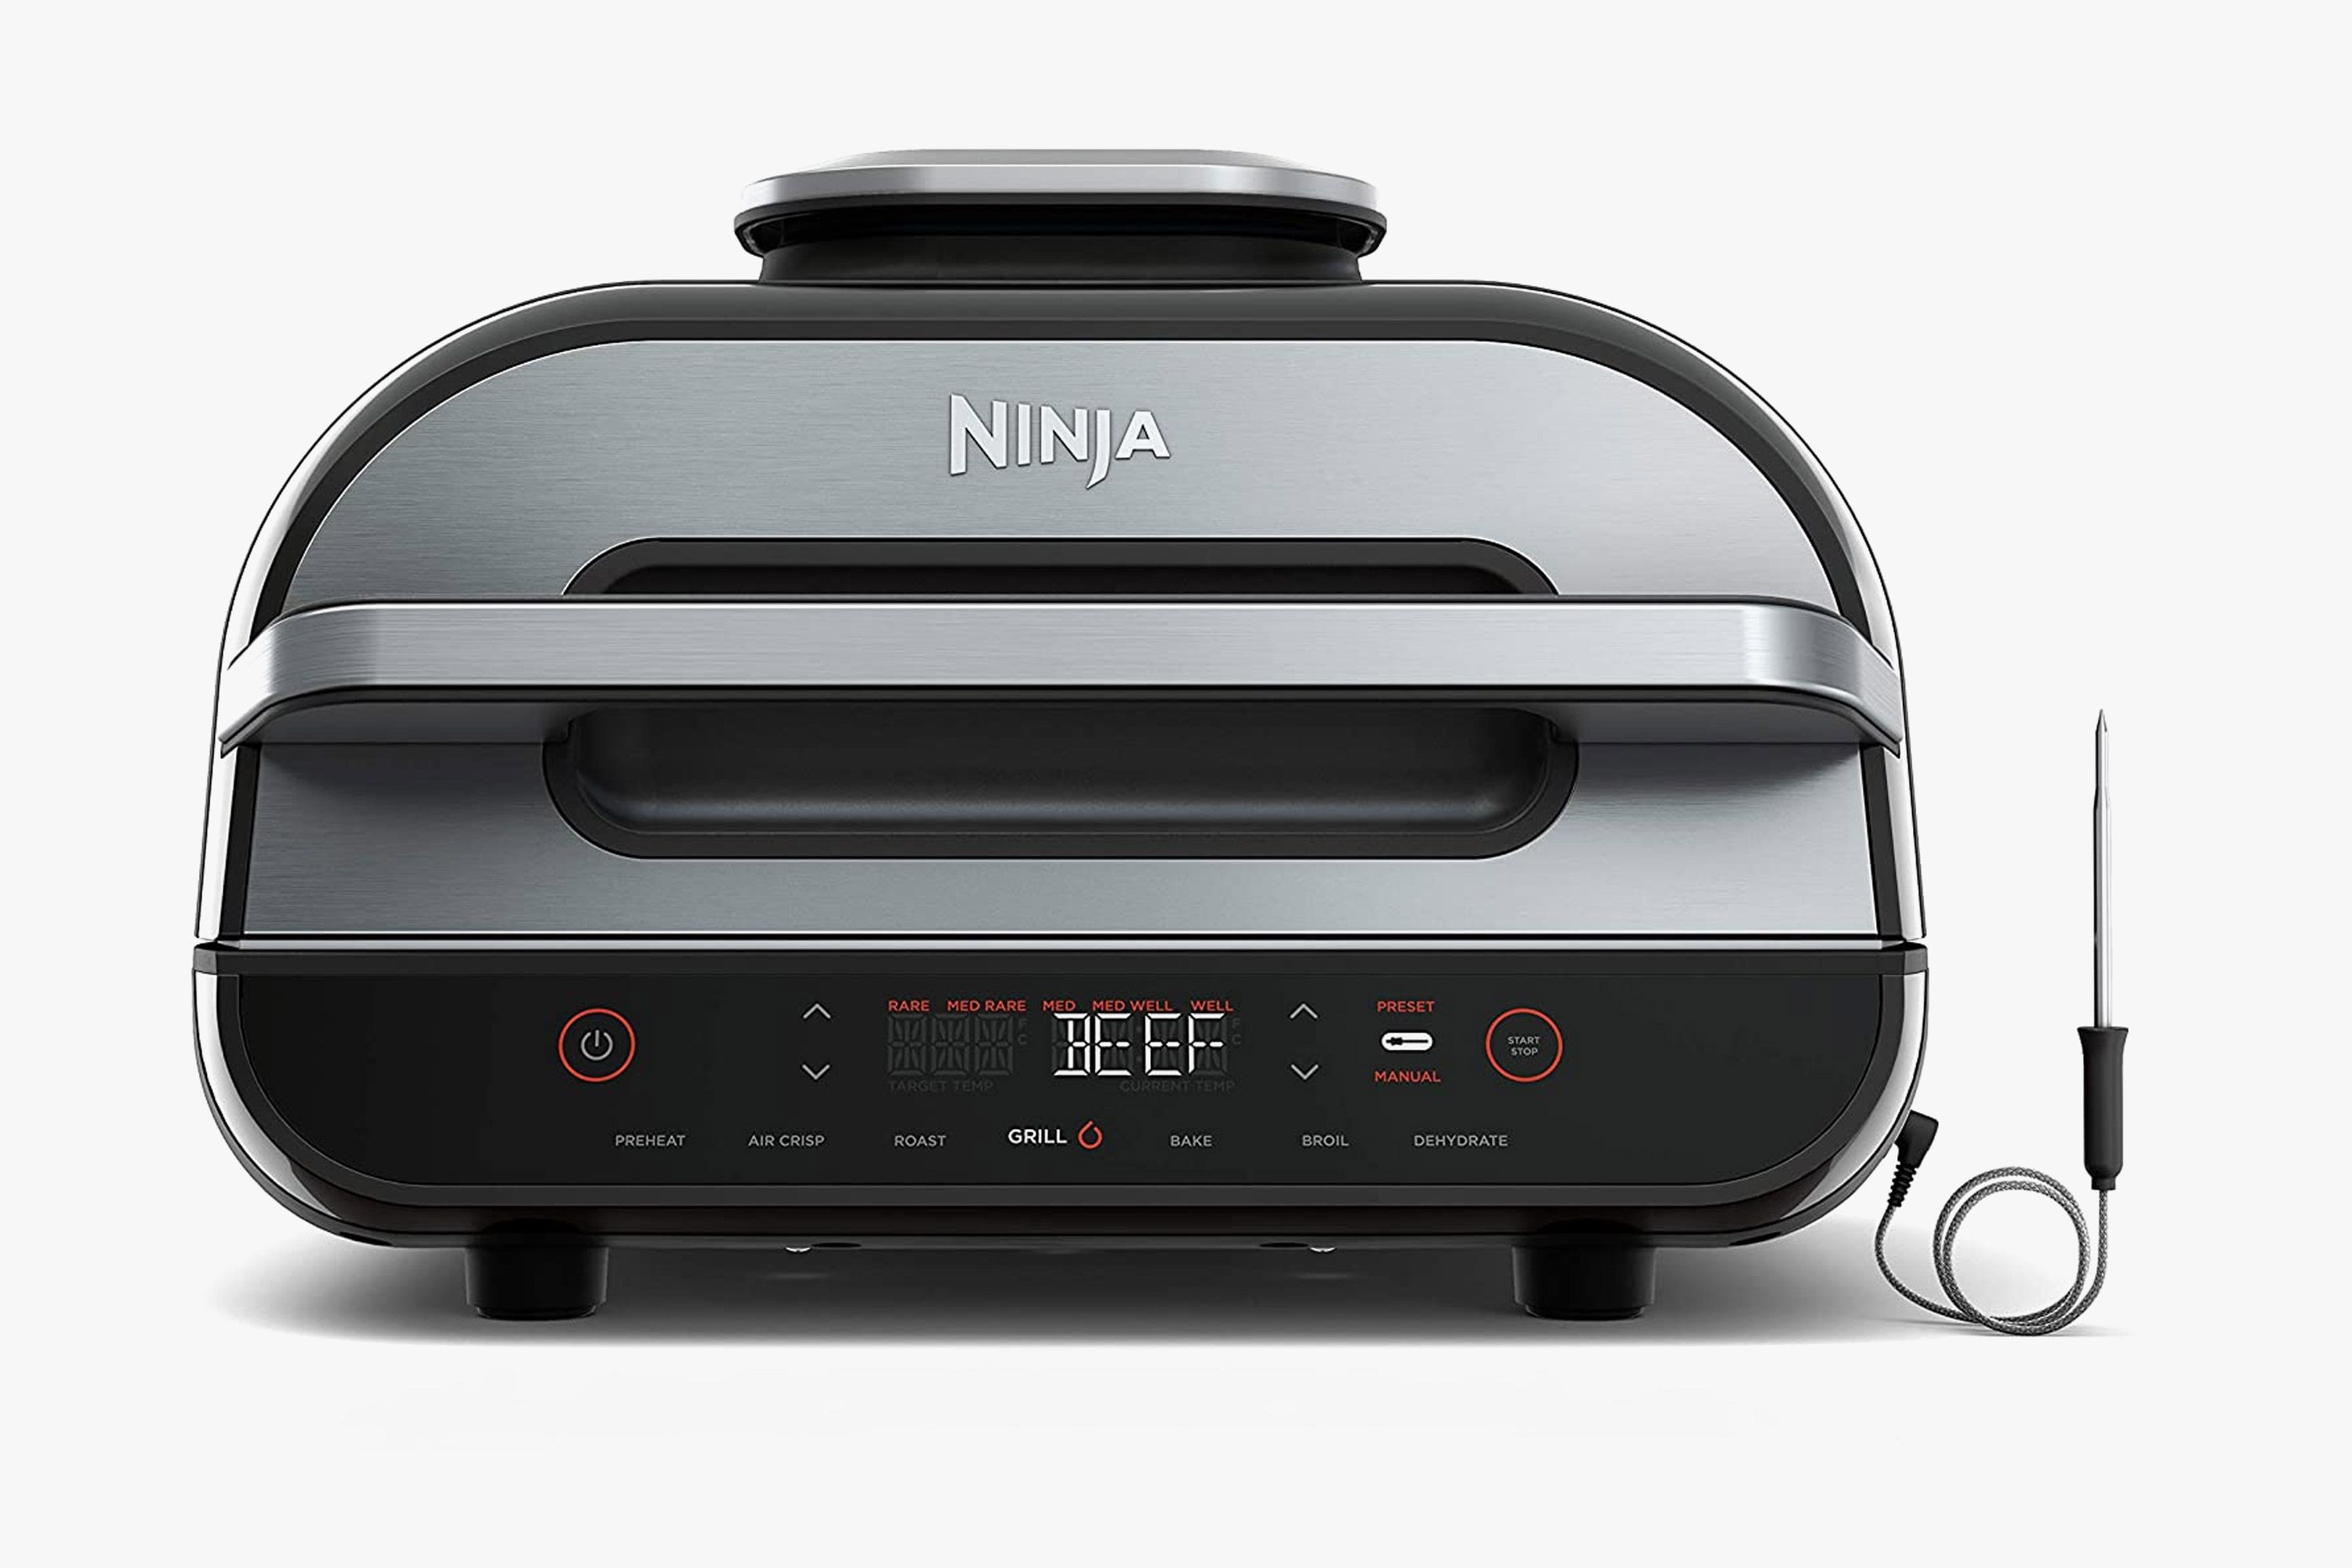 Ninja Foodi Grill Review: The Kitchen Appliance That Can Grill